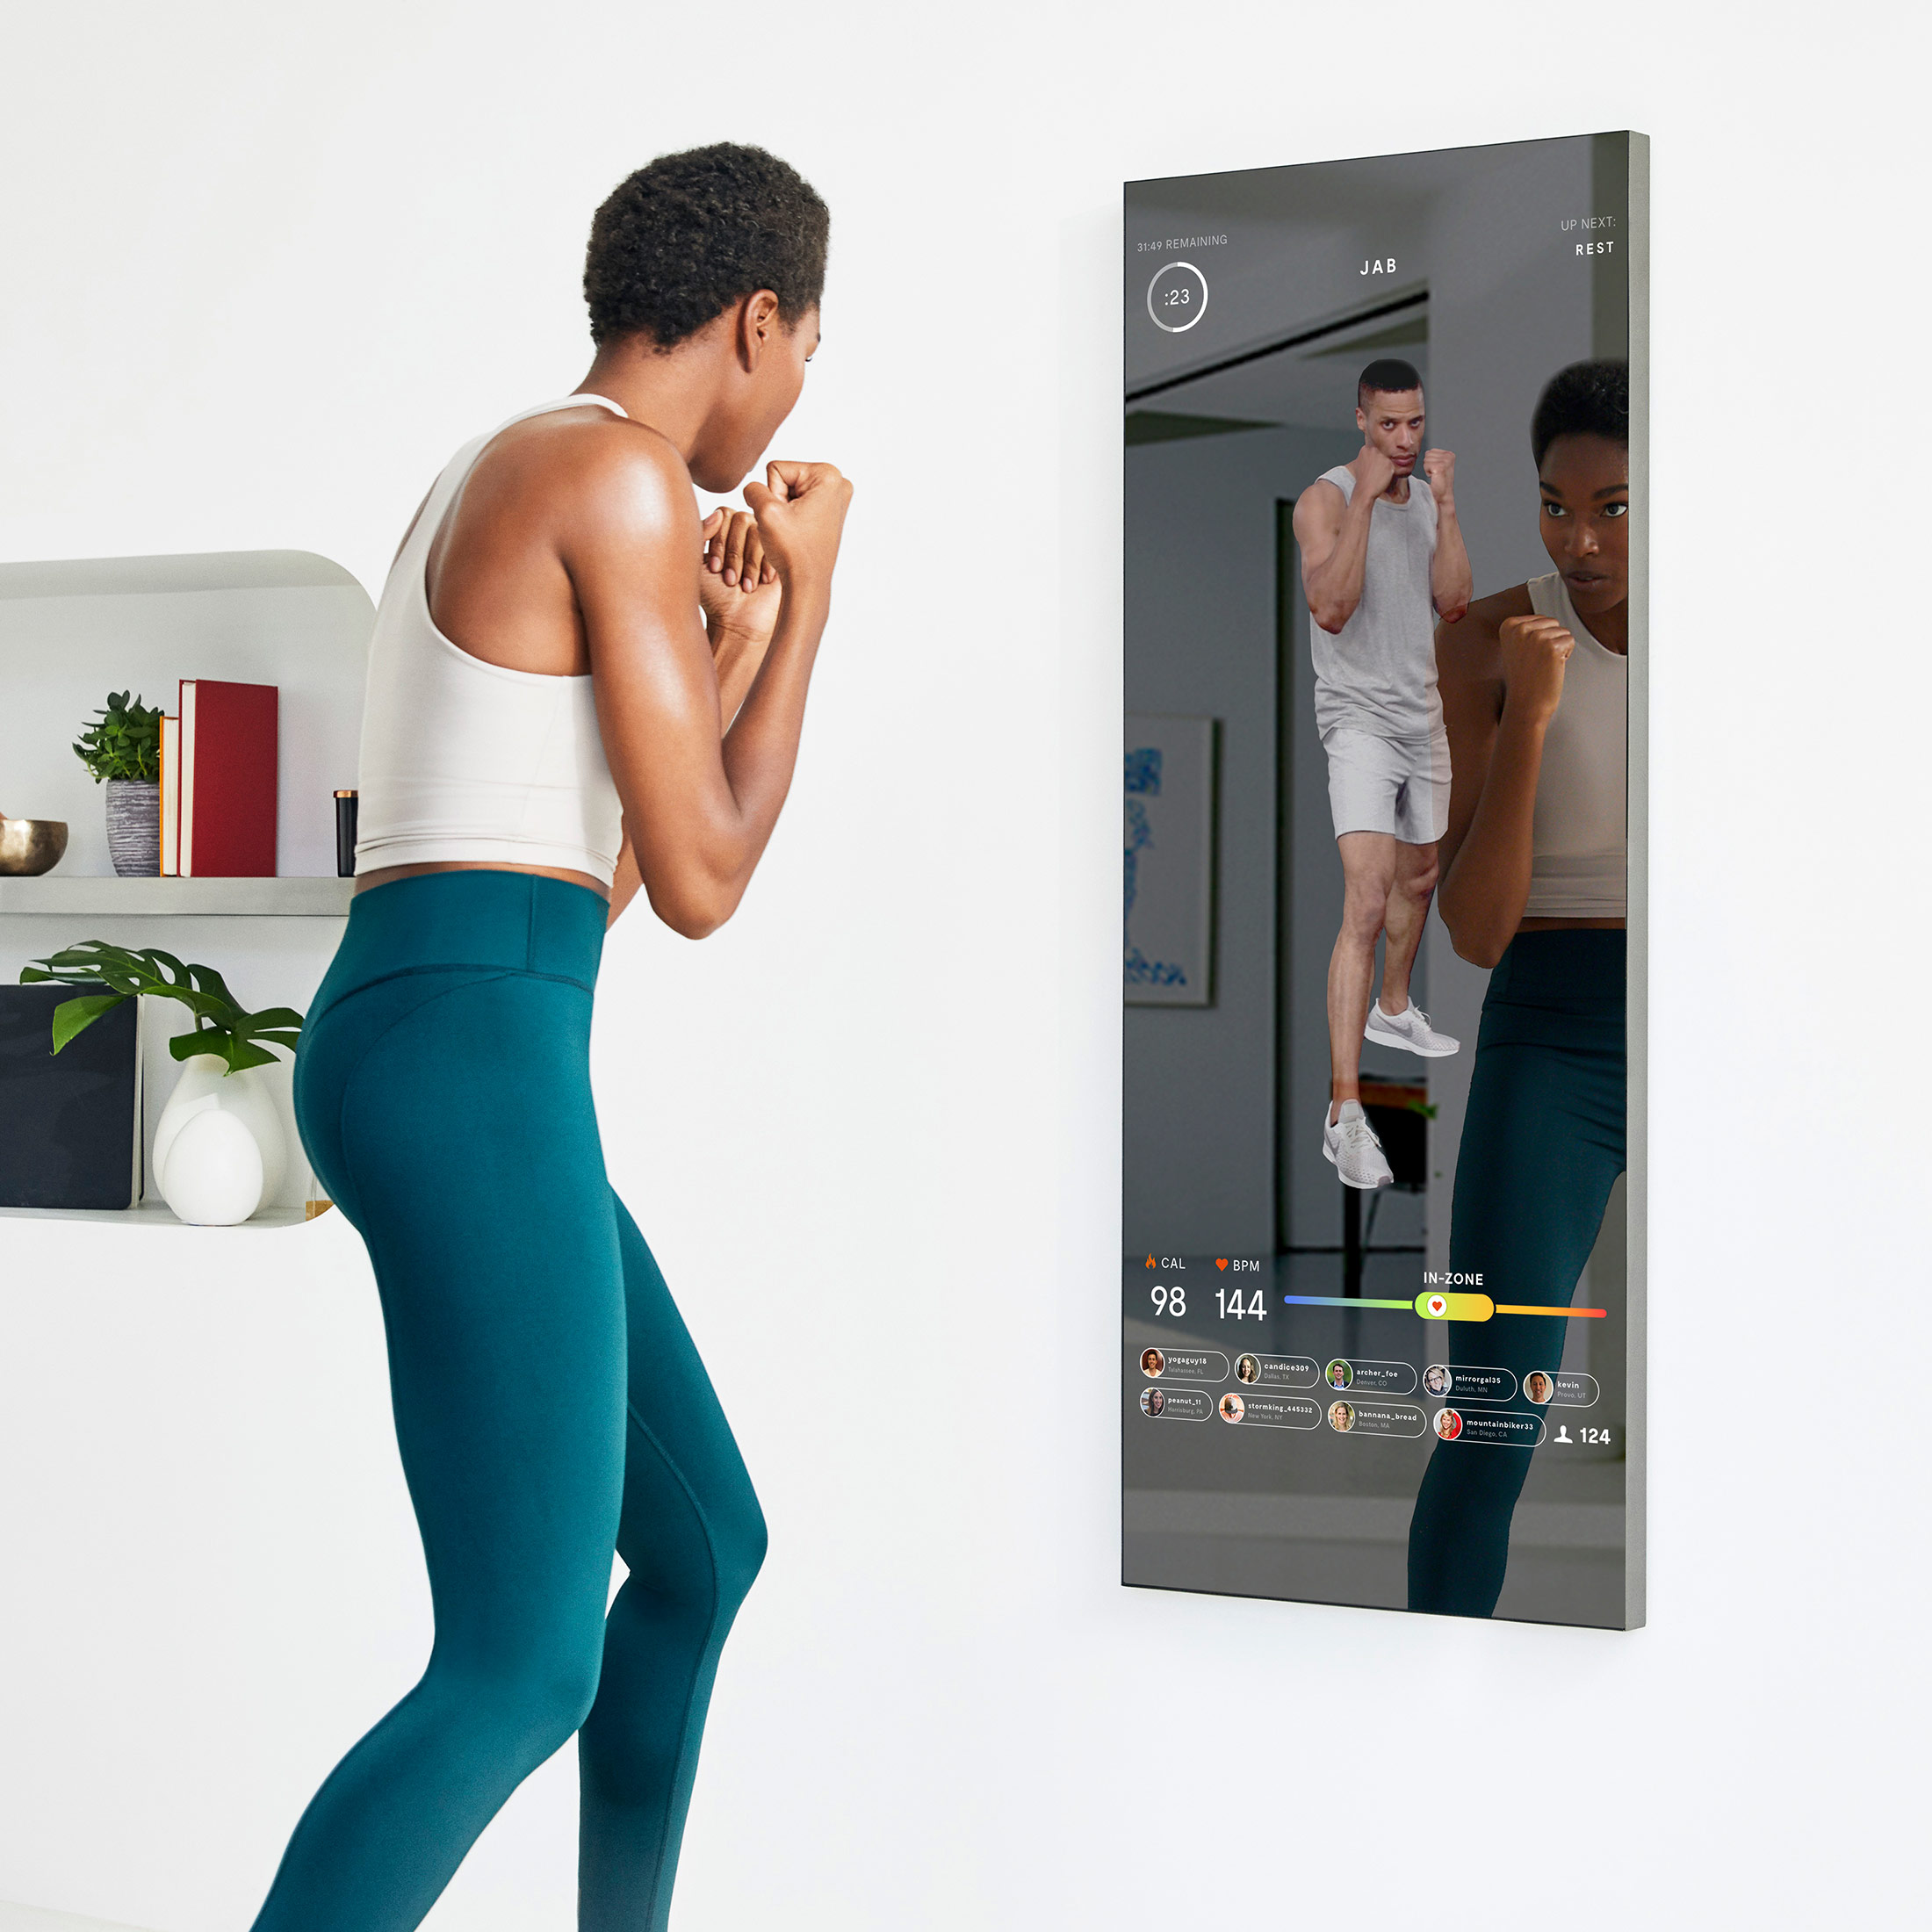 Lululemon's Mirror Workout Tool Doesn't Sell Sports Bras -- Yet - Bloomberg